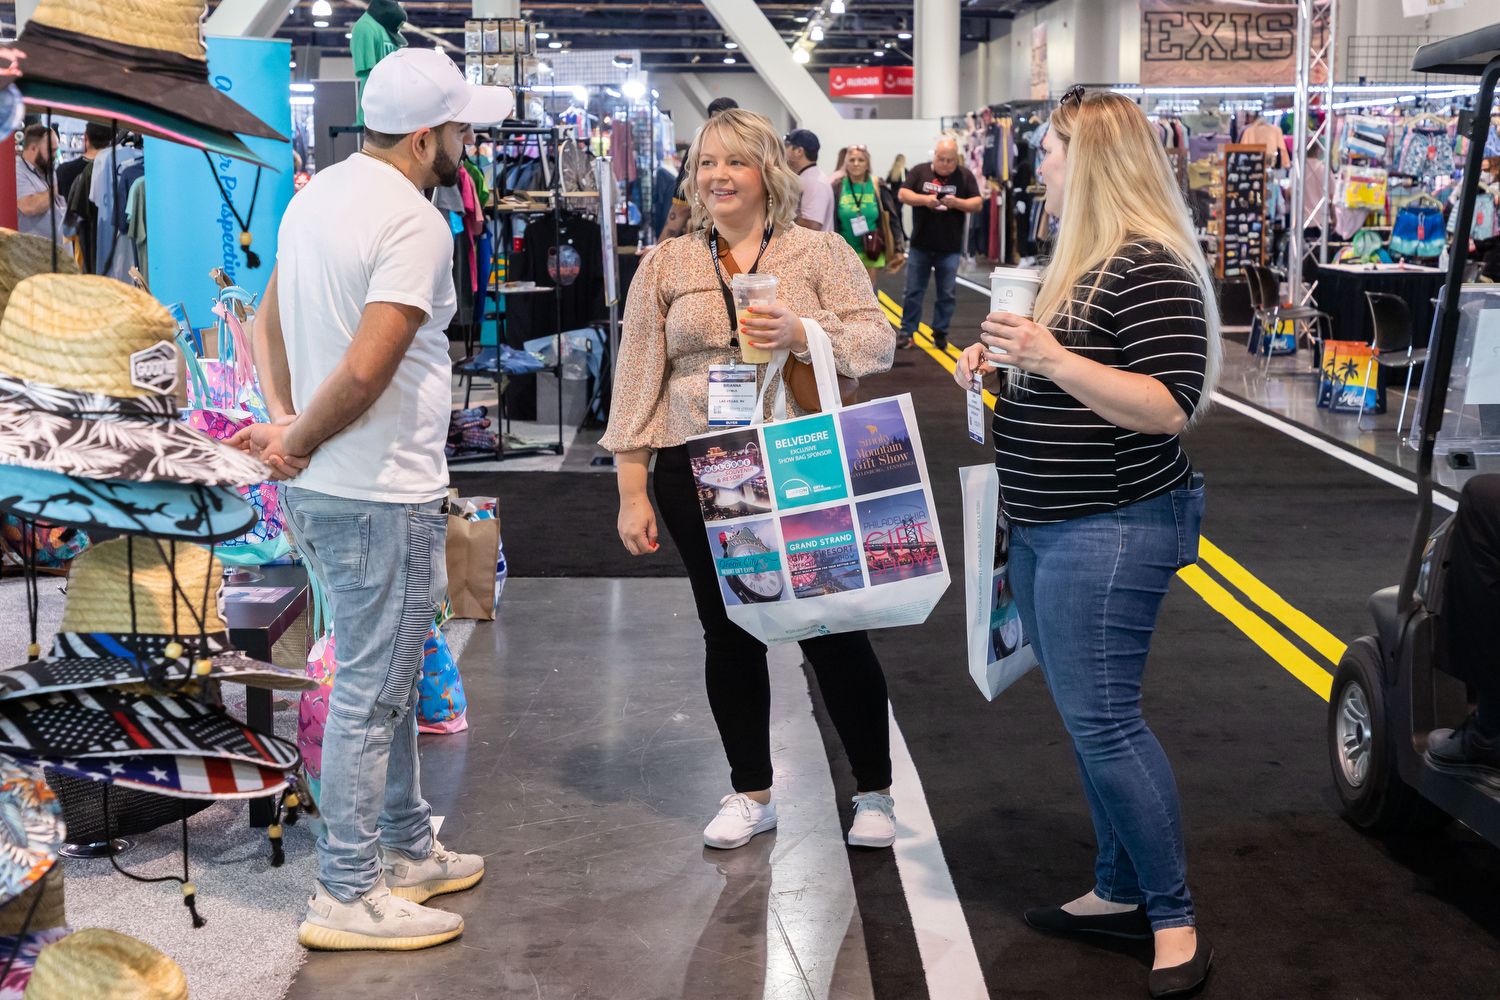 TIPS FOR FIRST TIME EXHIBITORS